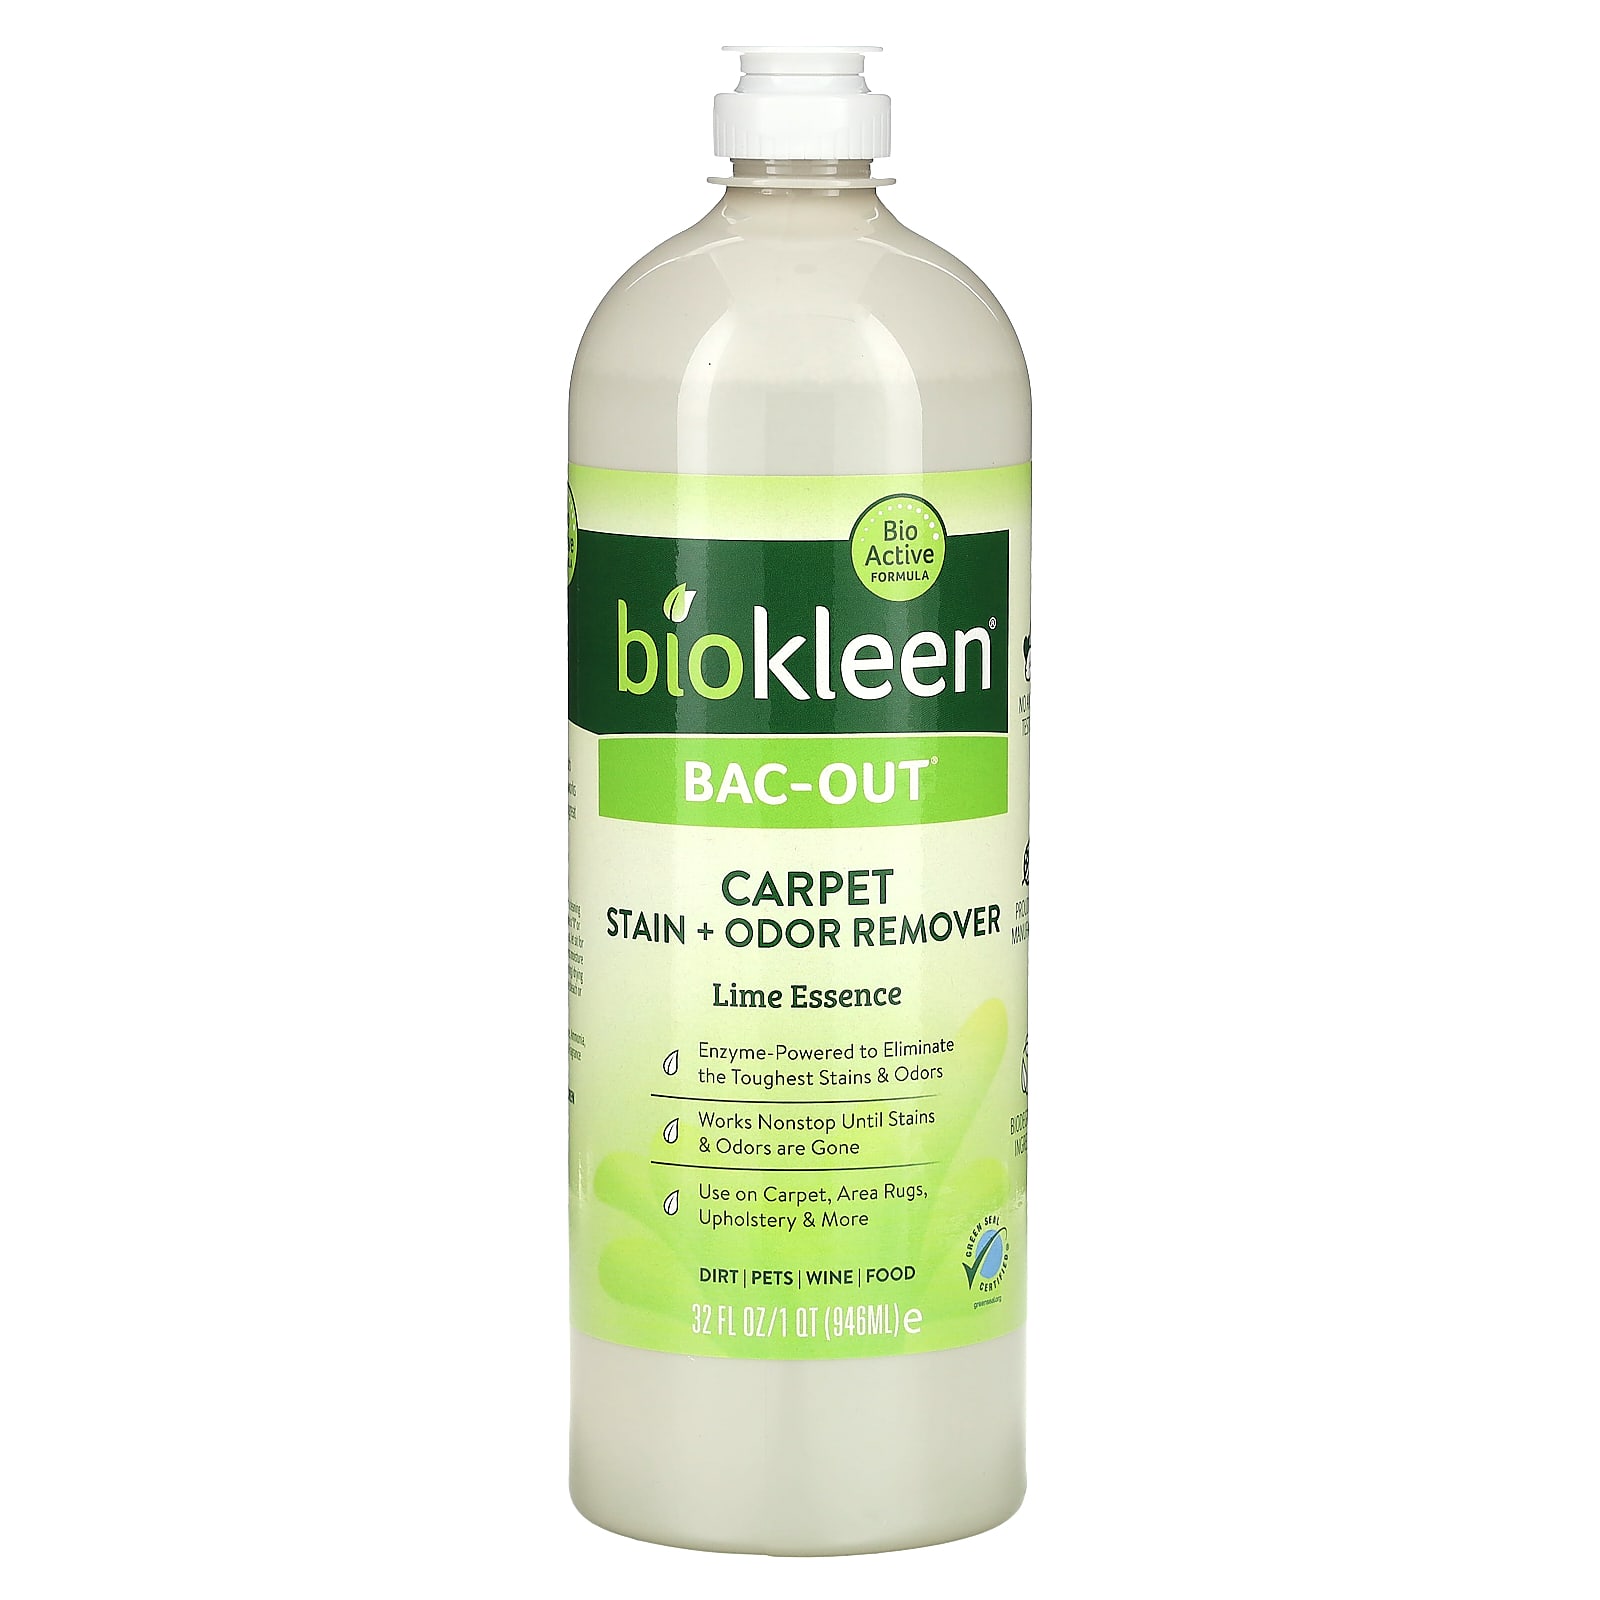 Biokleen Bac-Out Natural Stain Remover for Clothes - Use on Laundry, Diapers, Wine, Carpets, and More, Enzymatic, Plant-Based, 32 oz with